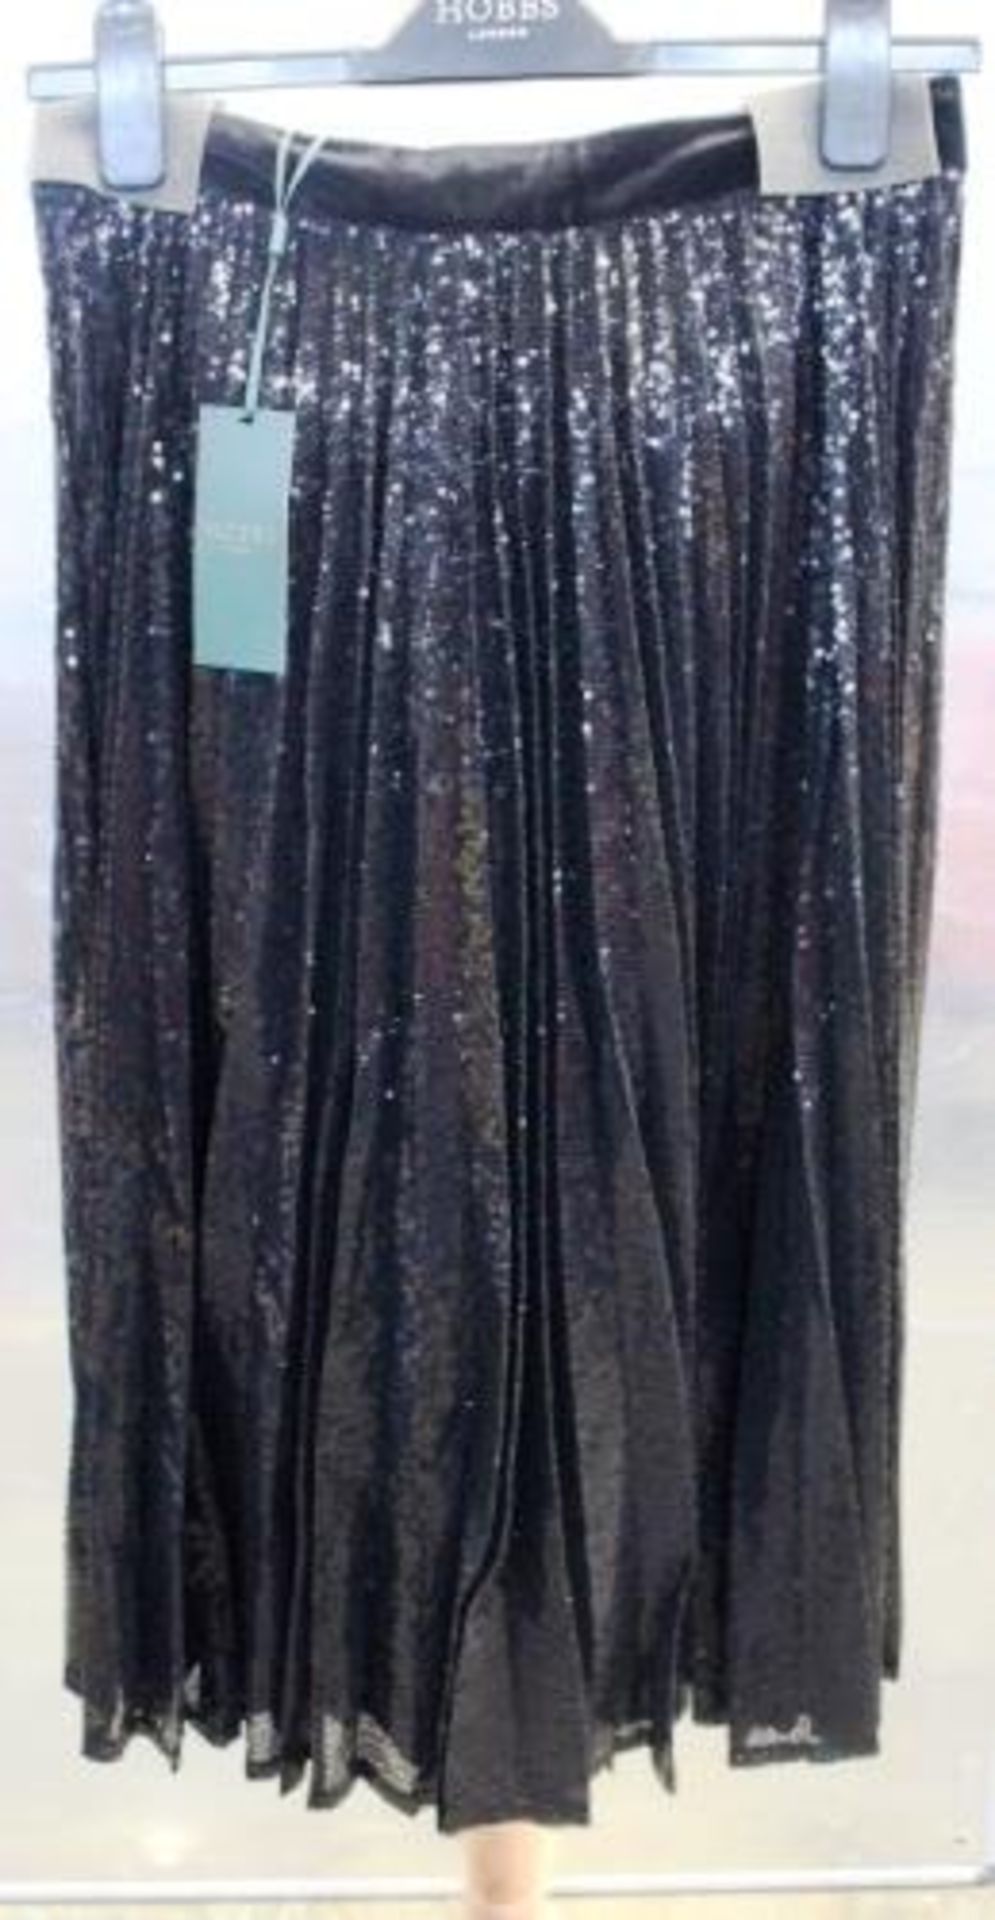 1 x Hobbs Claudette black sequin skirt, size 8, RRP £149.00 - New with tags (ES16A)